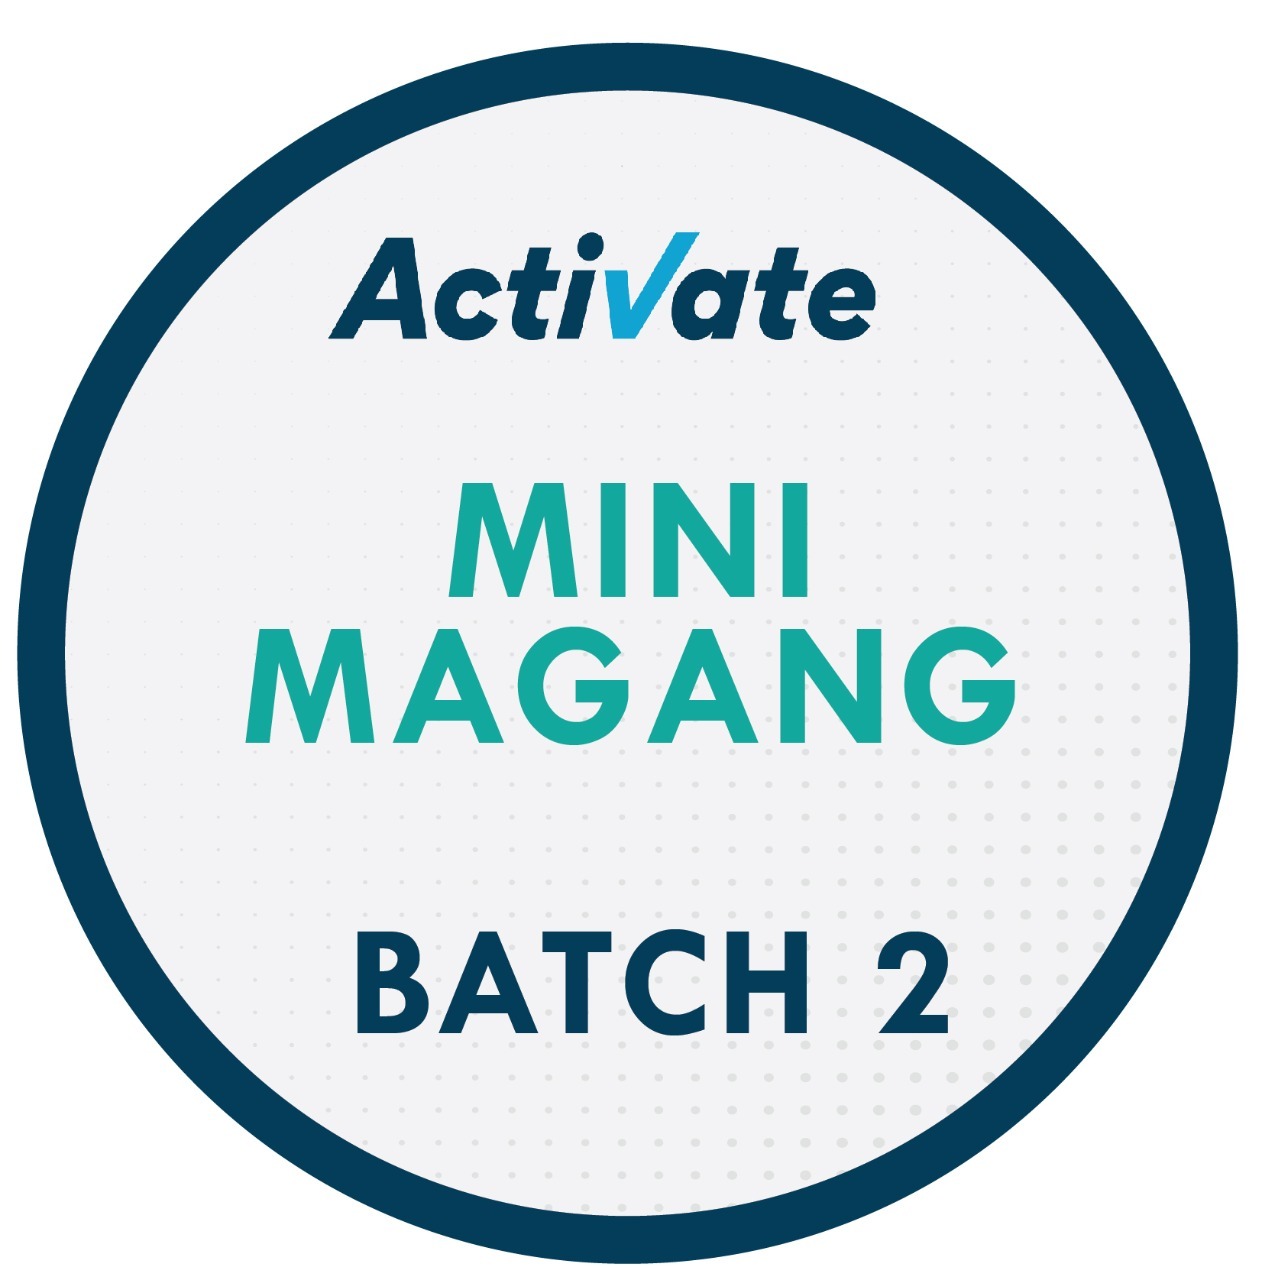 Activate Mini Magang Batch 2